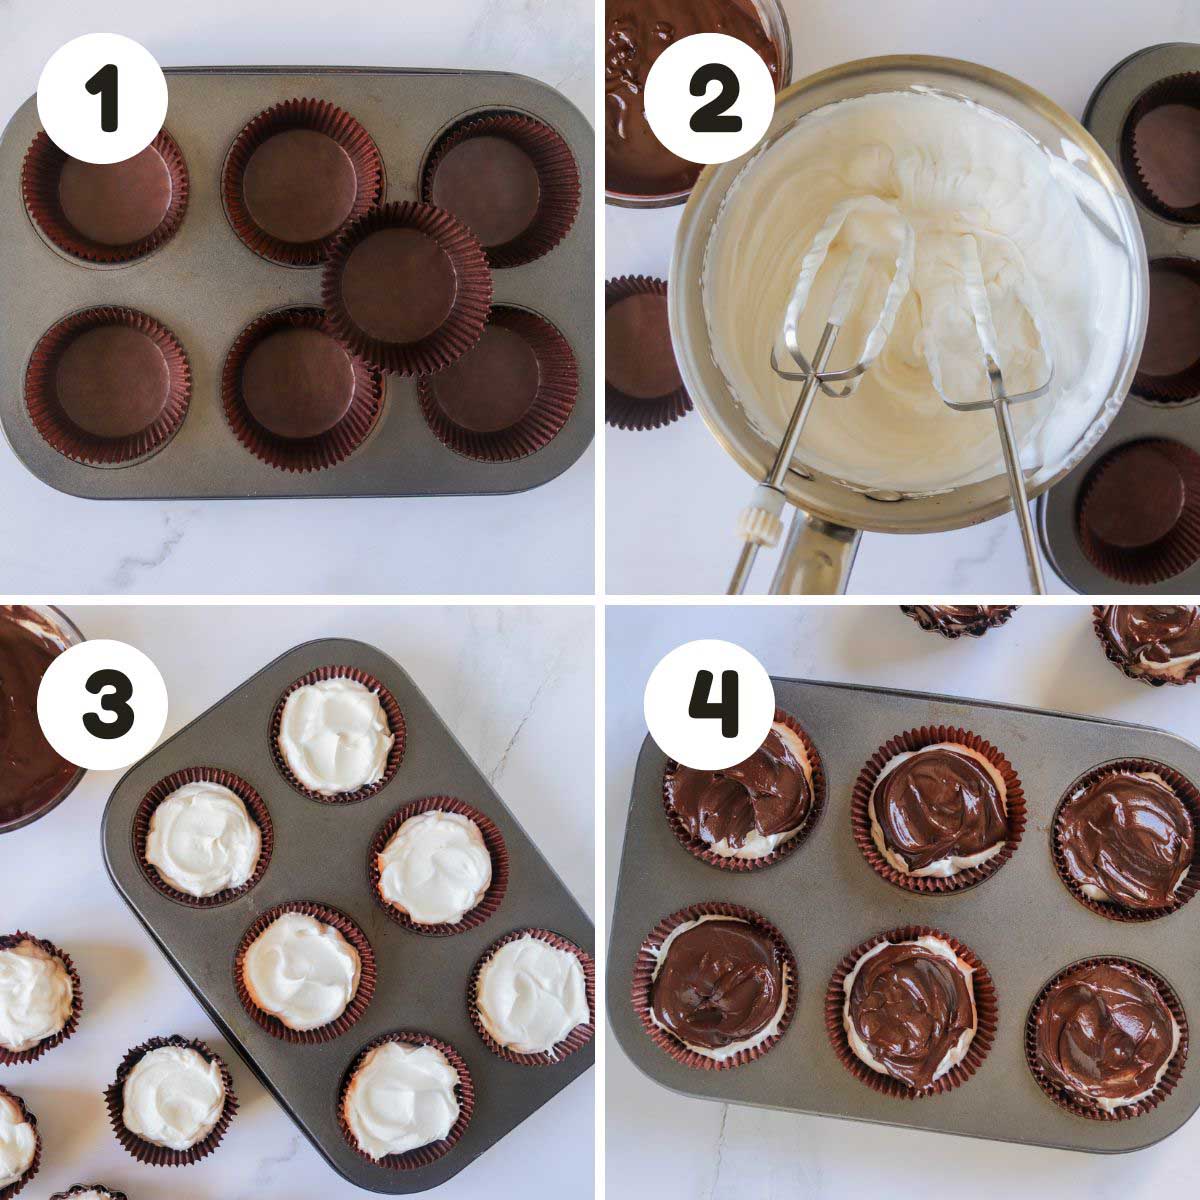 Steps to make the Cool Whip treats.